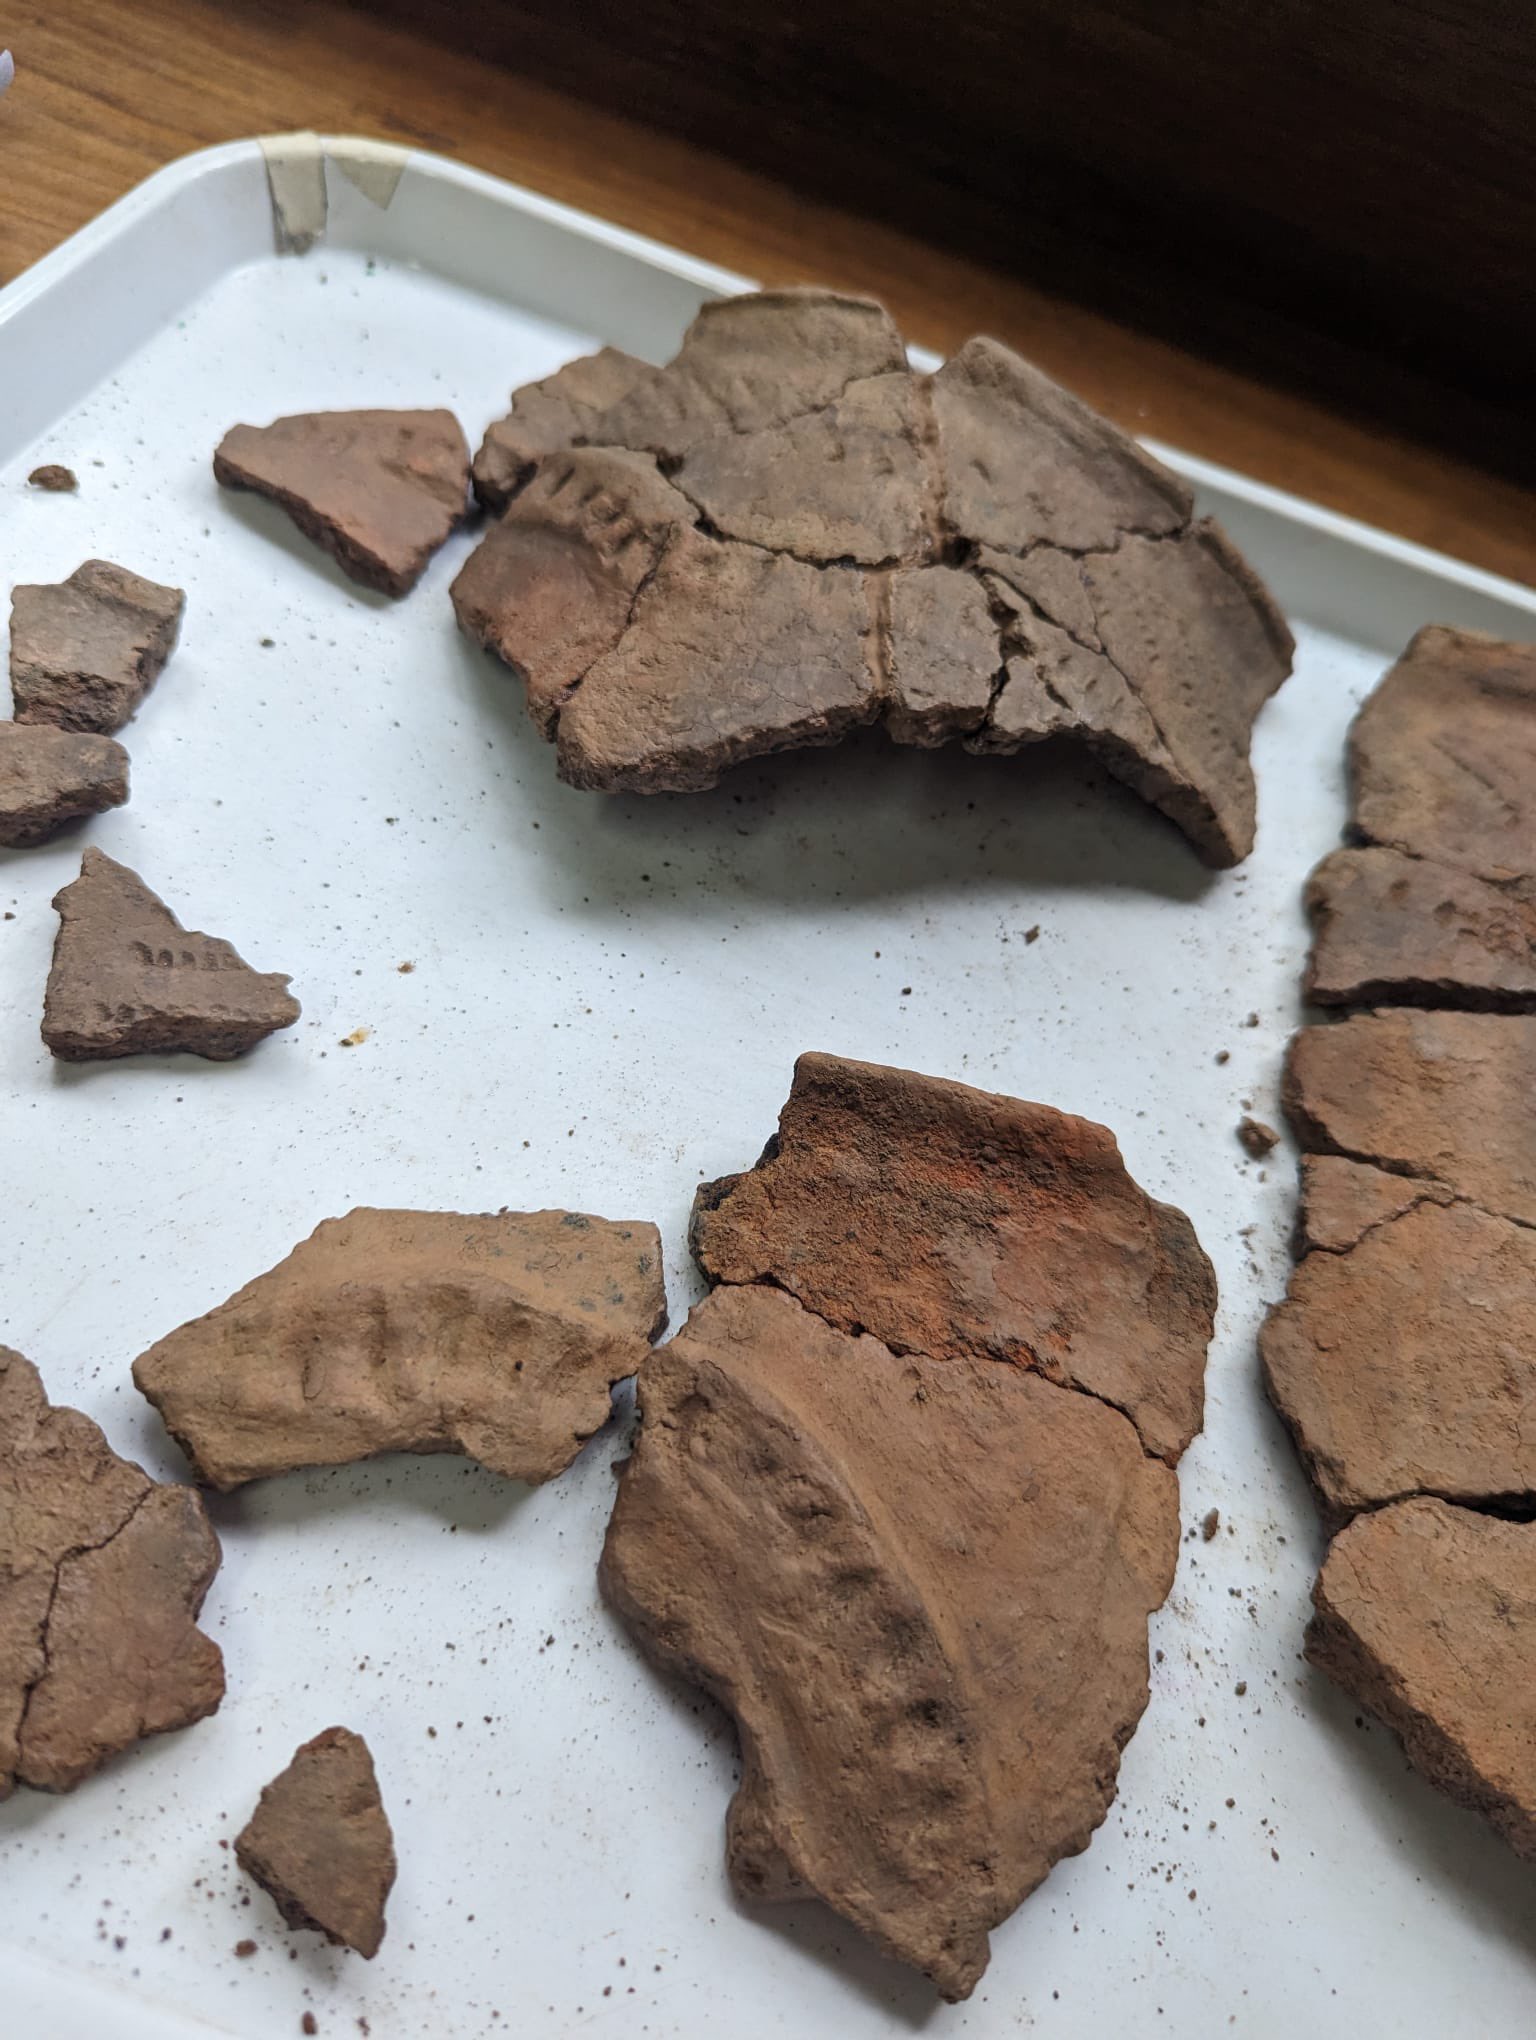 Fragments of pot from the Trelai Park 2022 excavation being conserved by Leonie McKenzie